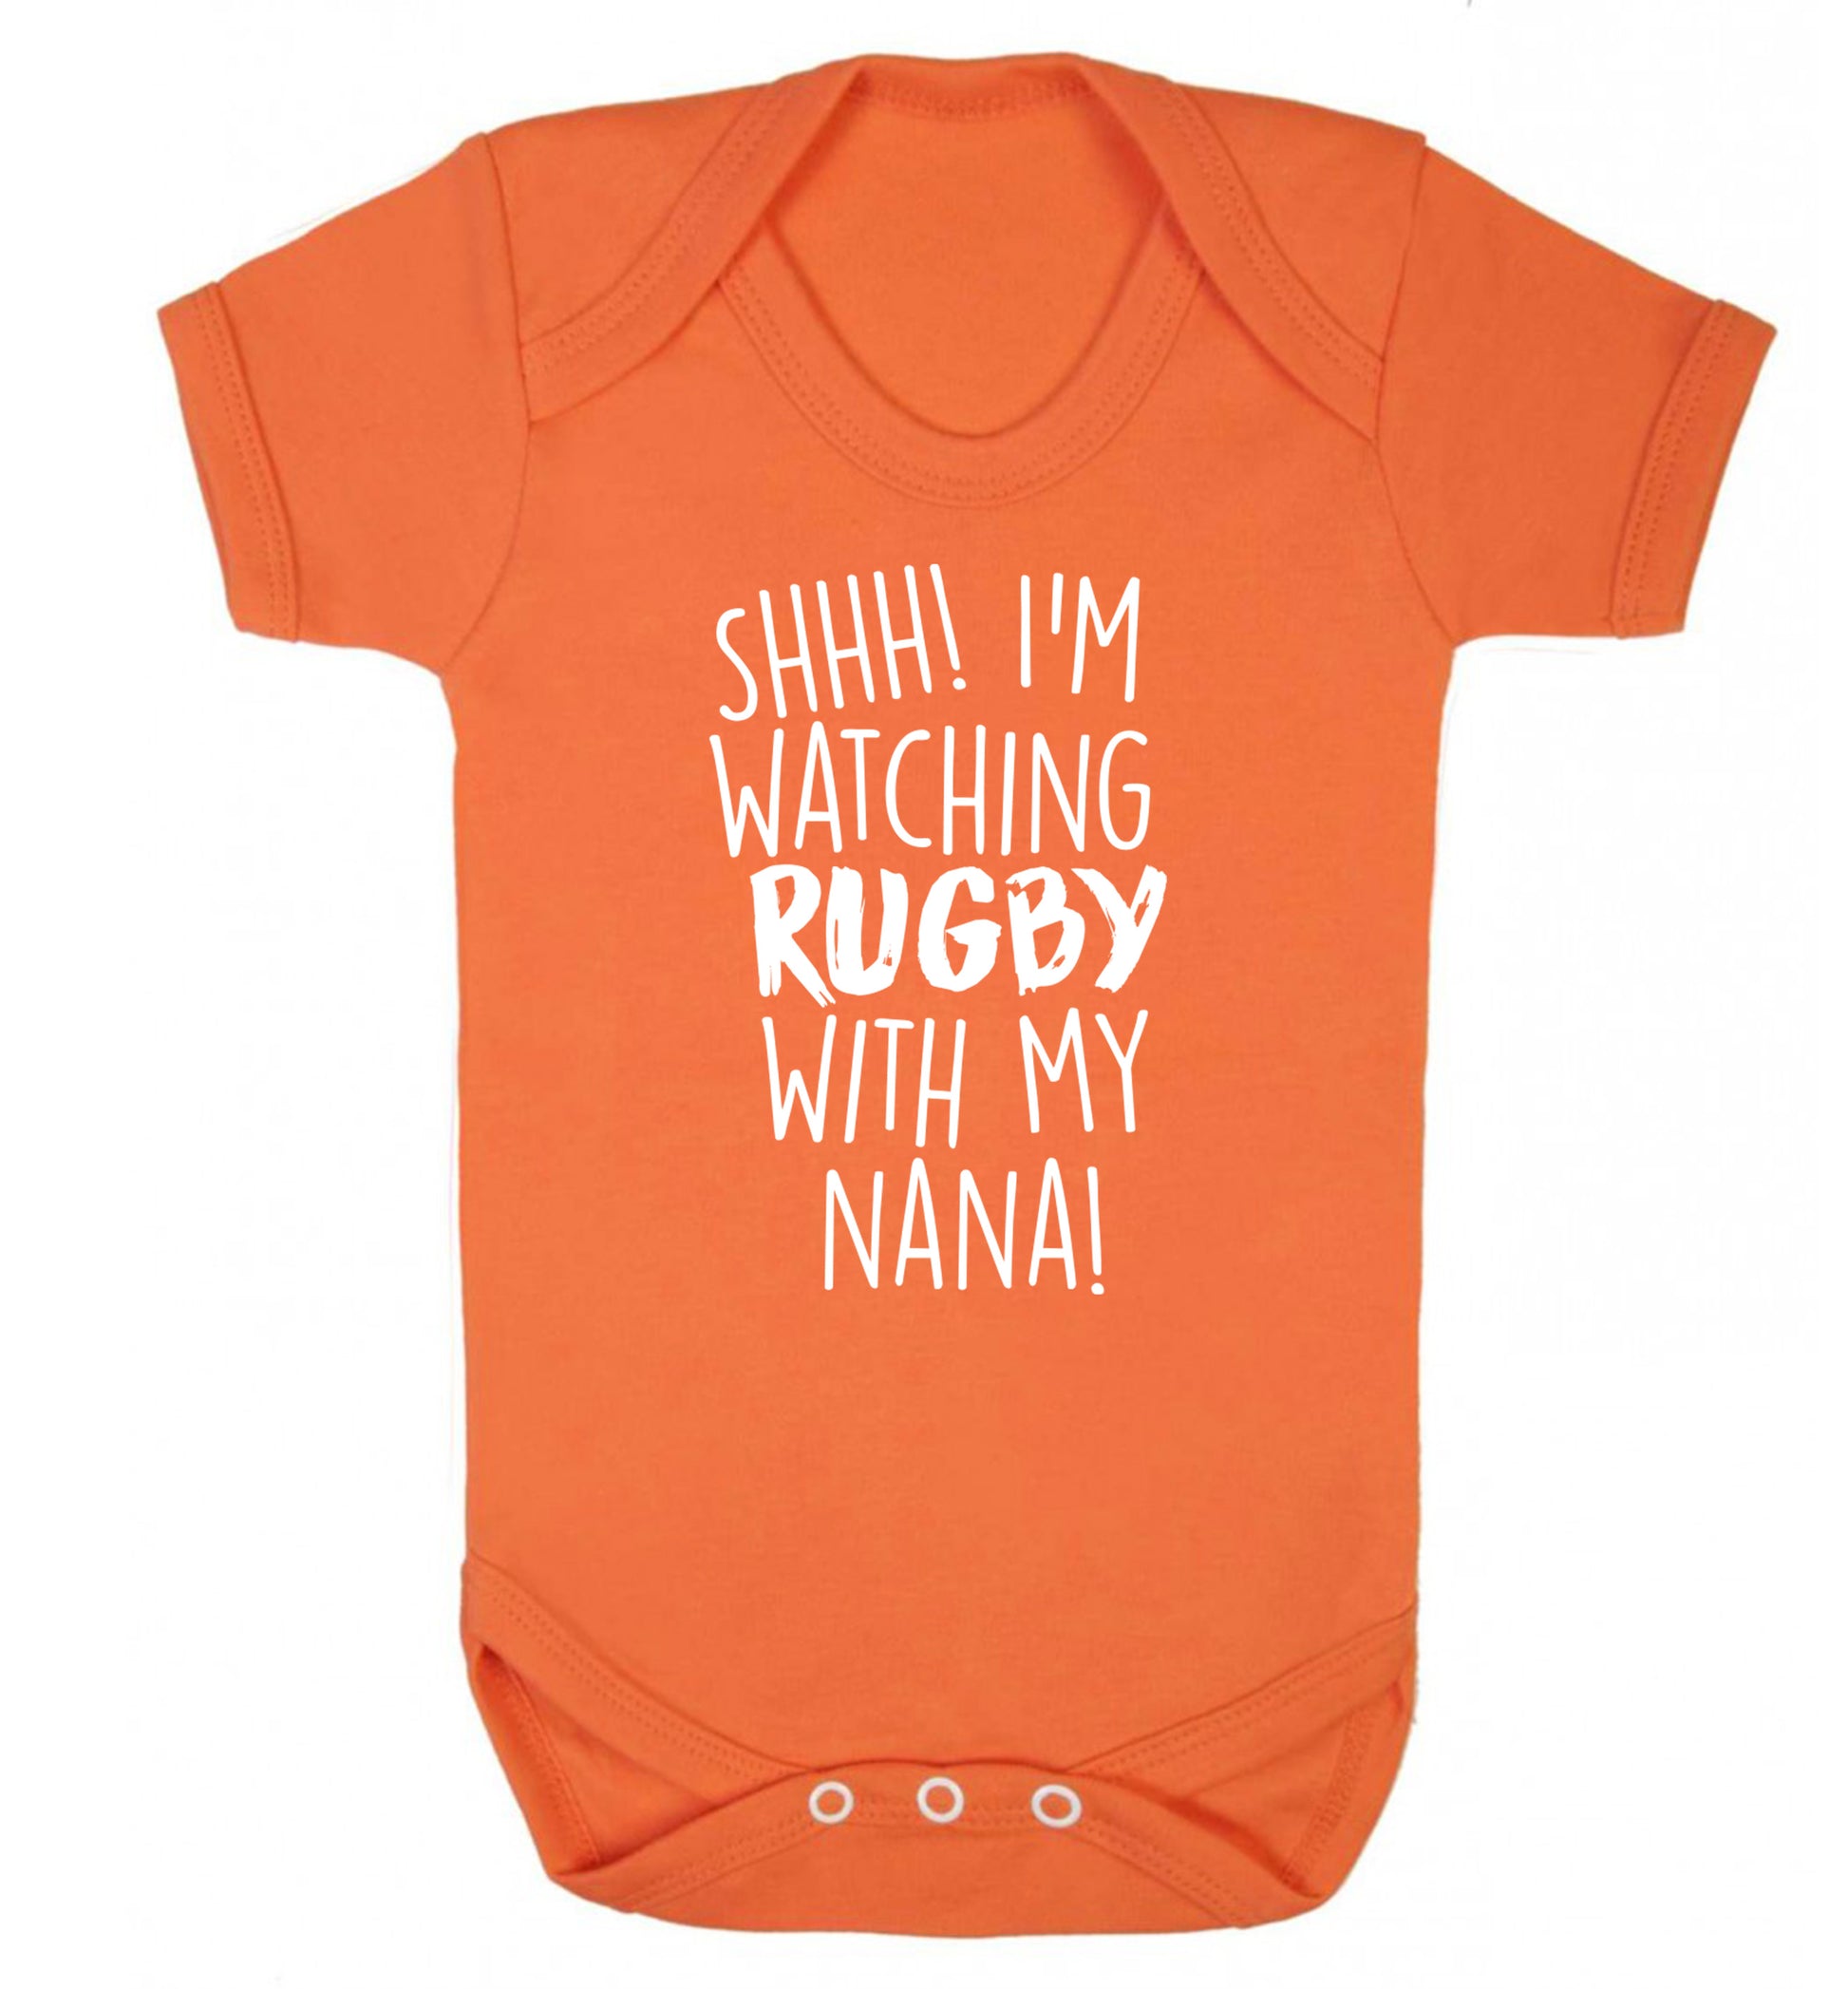 Shh I'm watching rugby with my nana Baby Vest orange 18-24 months